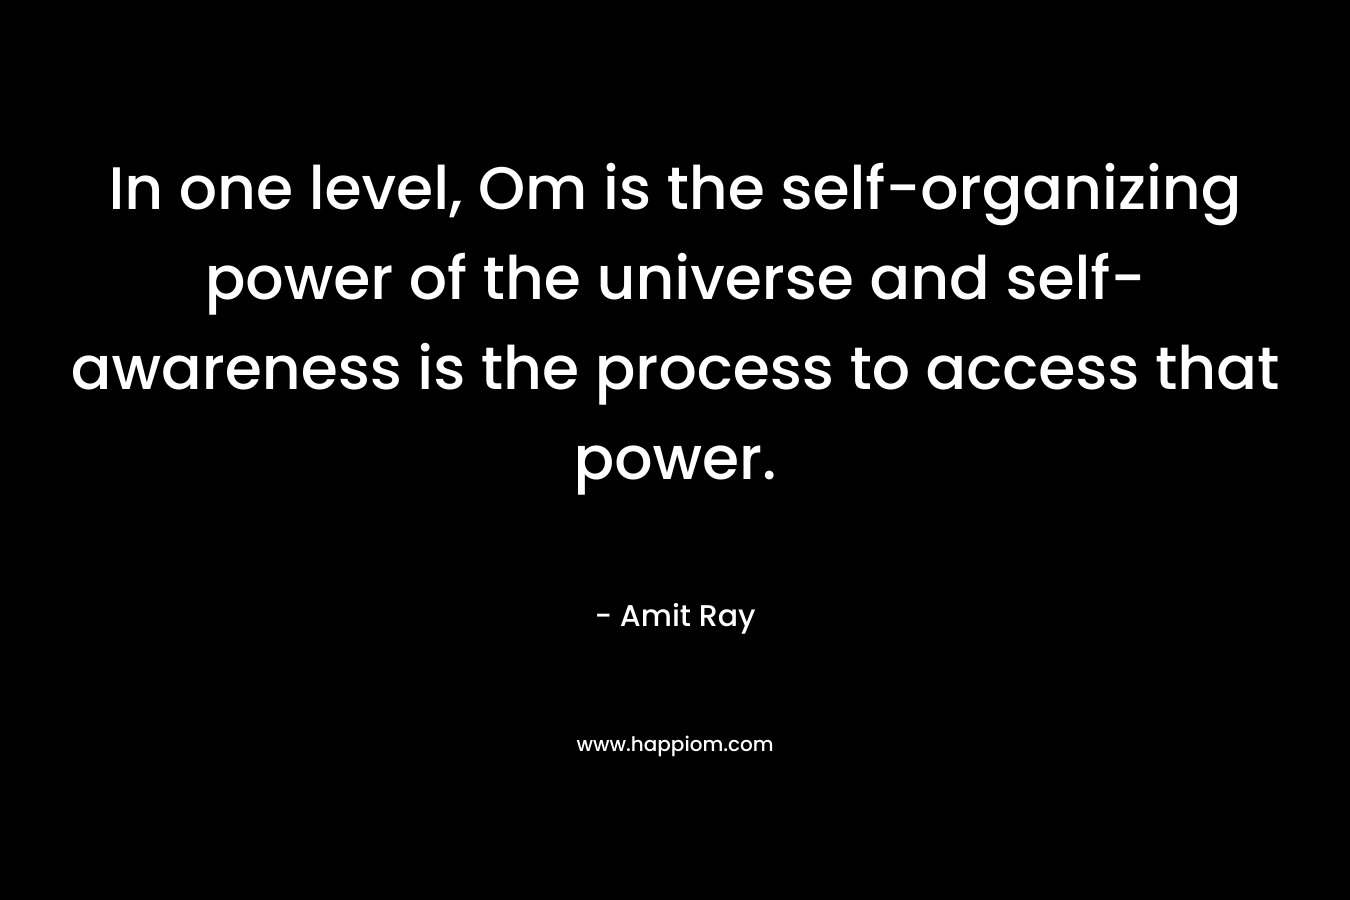 In one level, Om is the self-organizing power of the universe and self-awareness is the process to access that power.